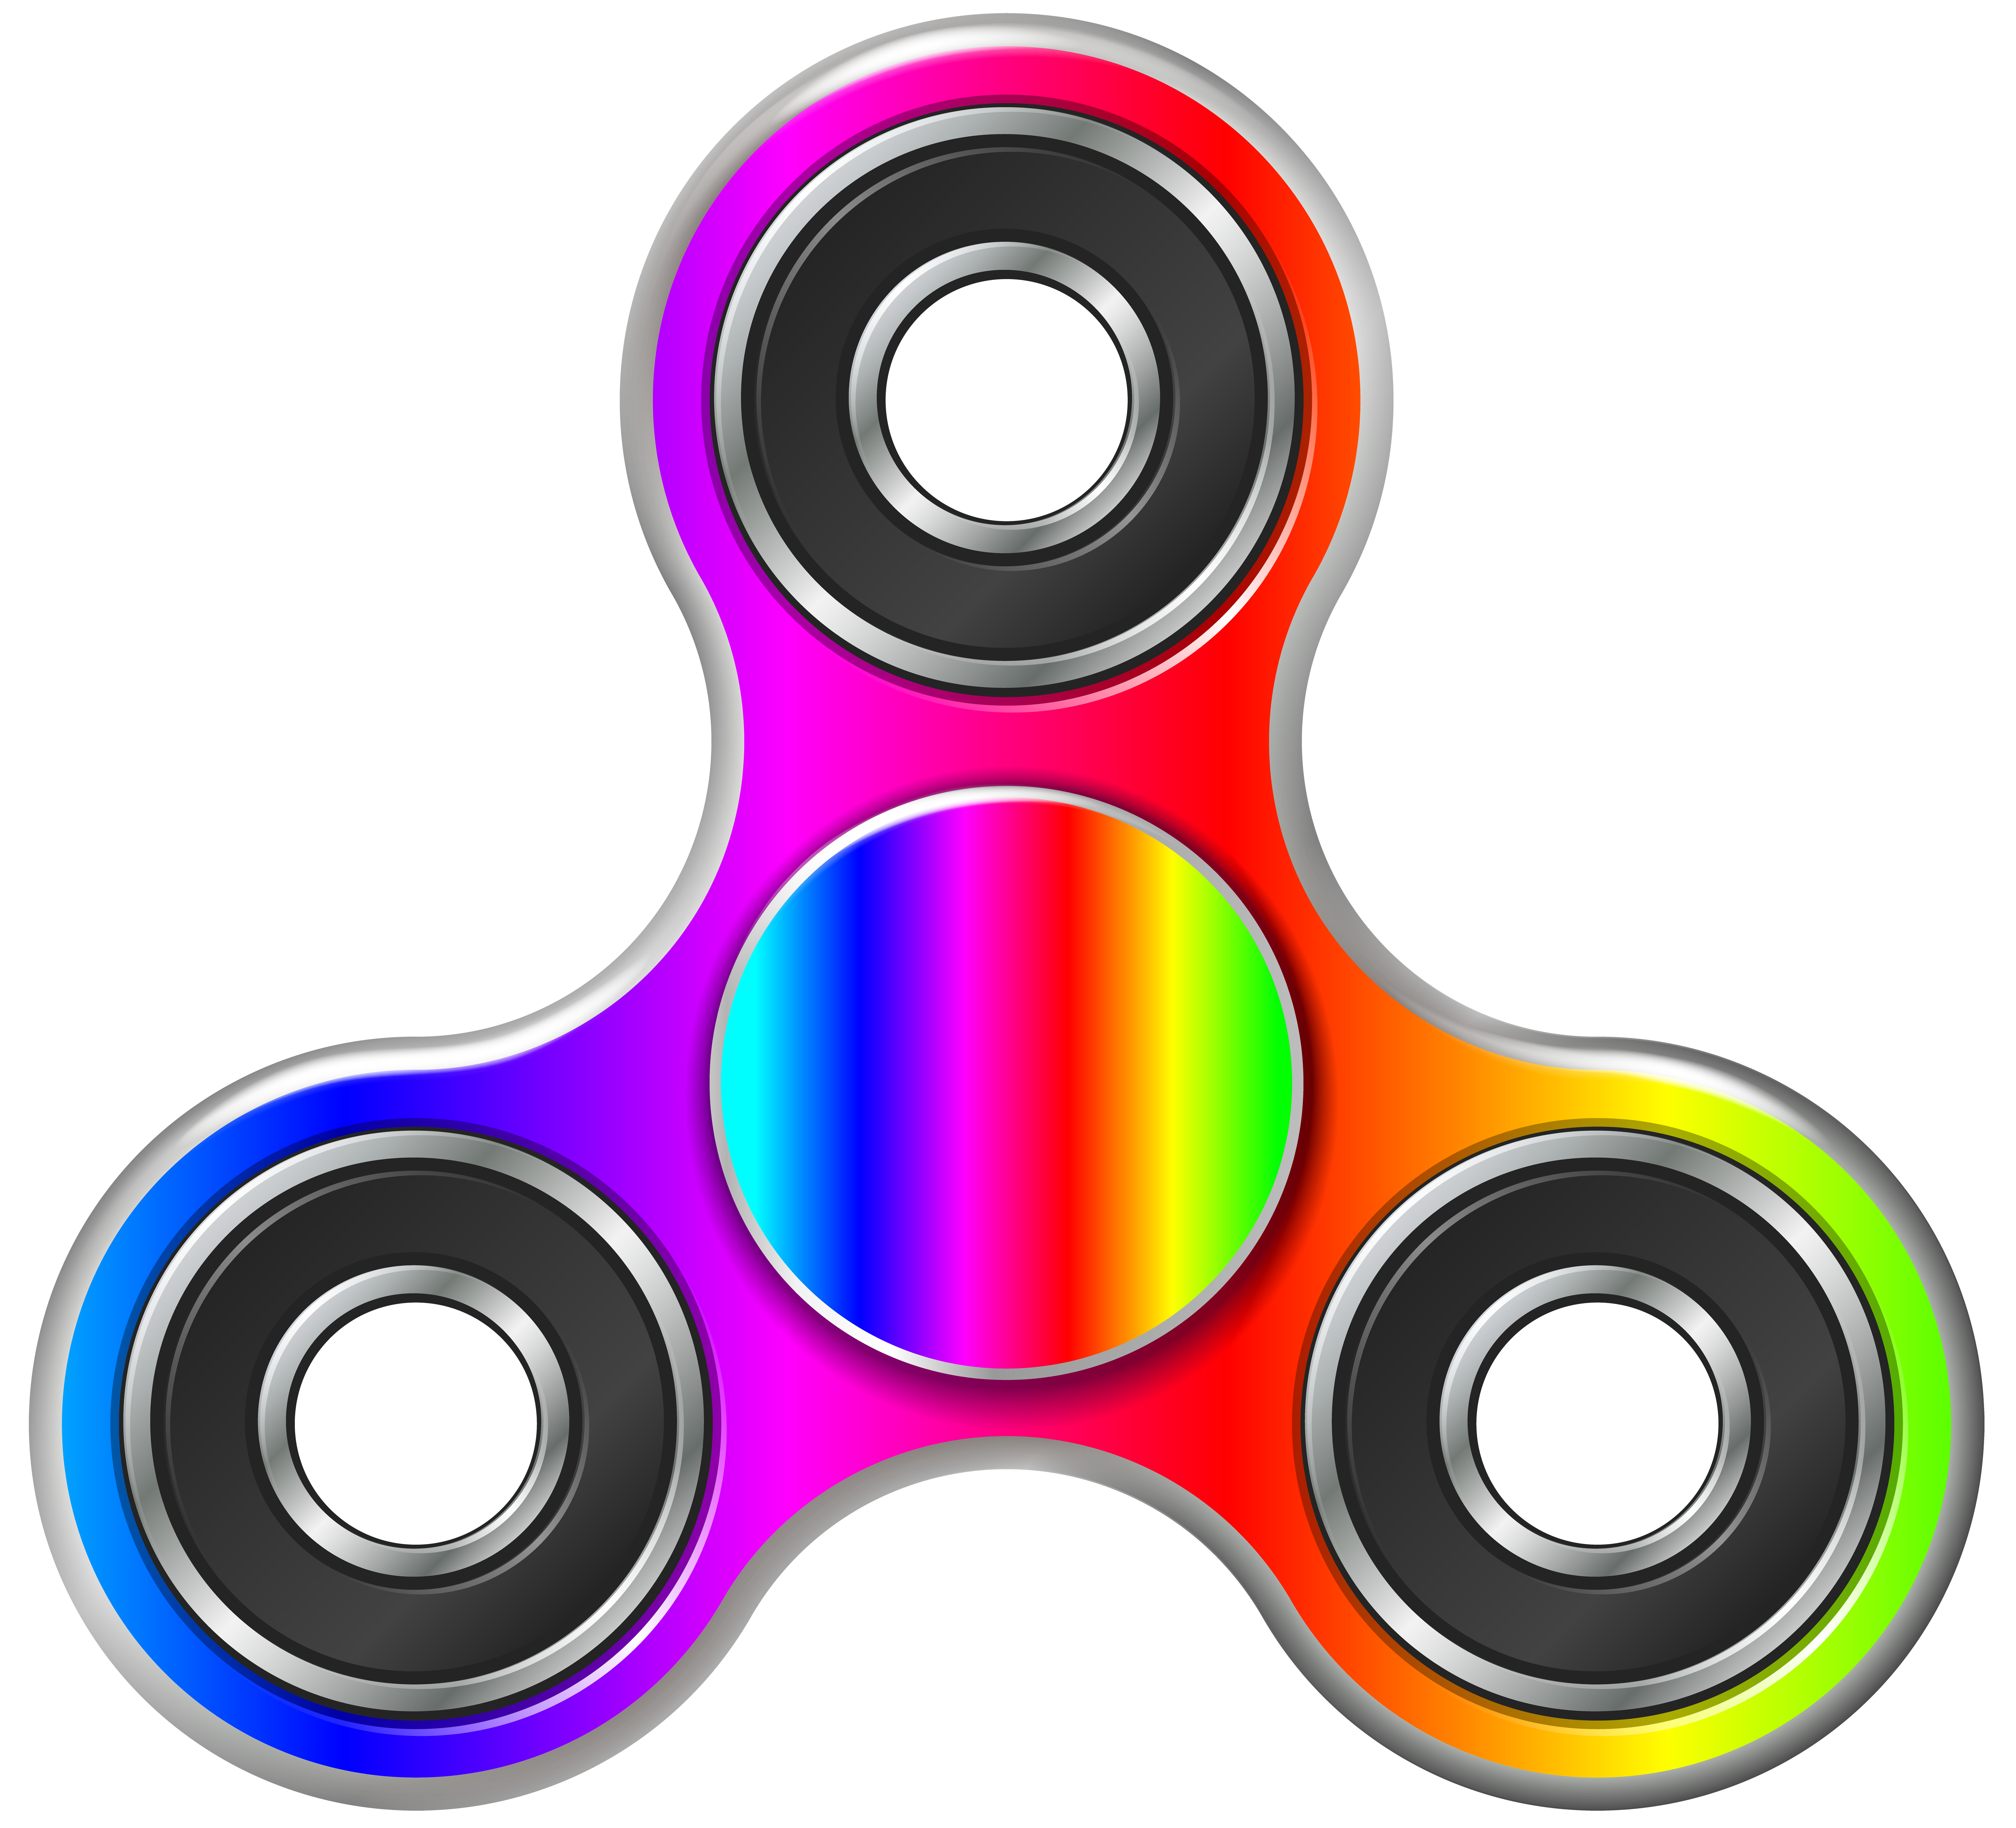 game spinner clipart - photo #26